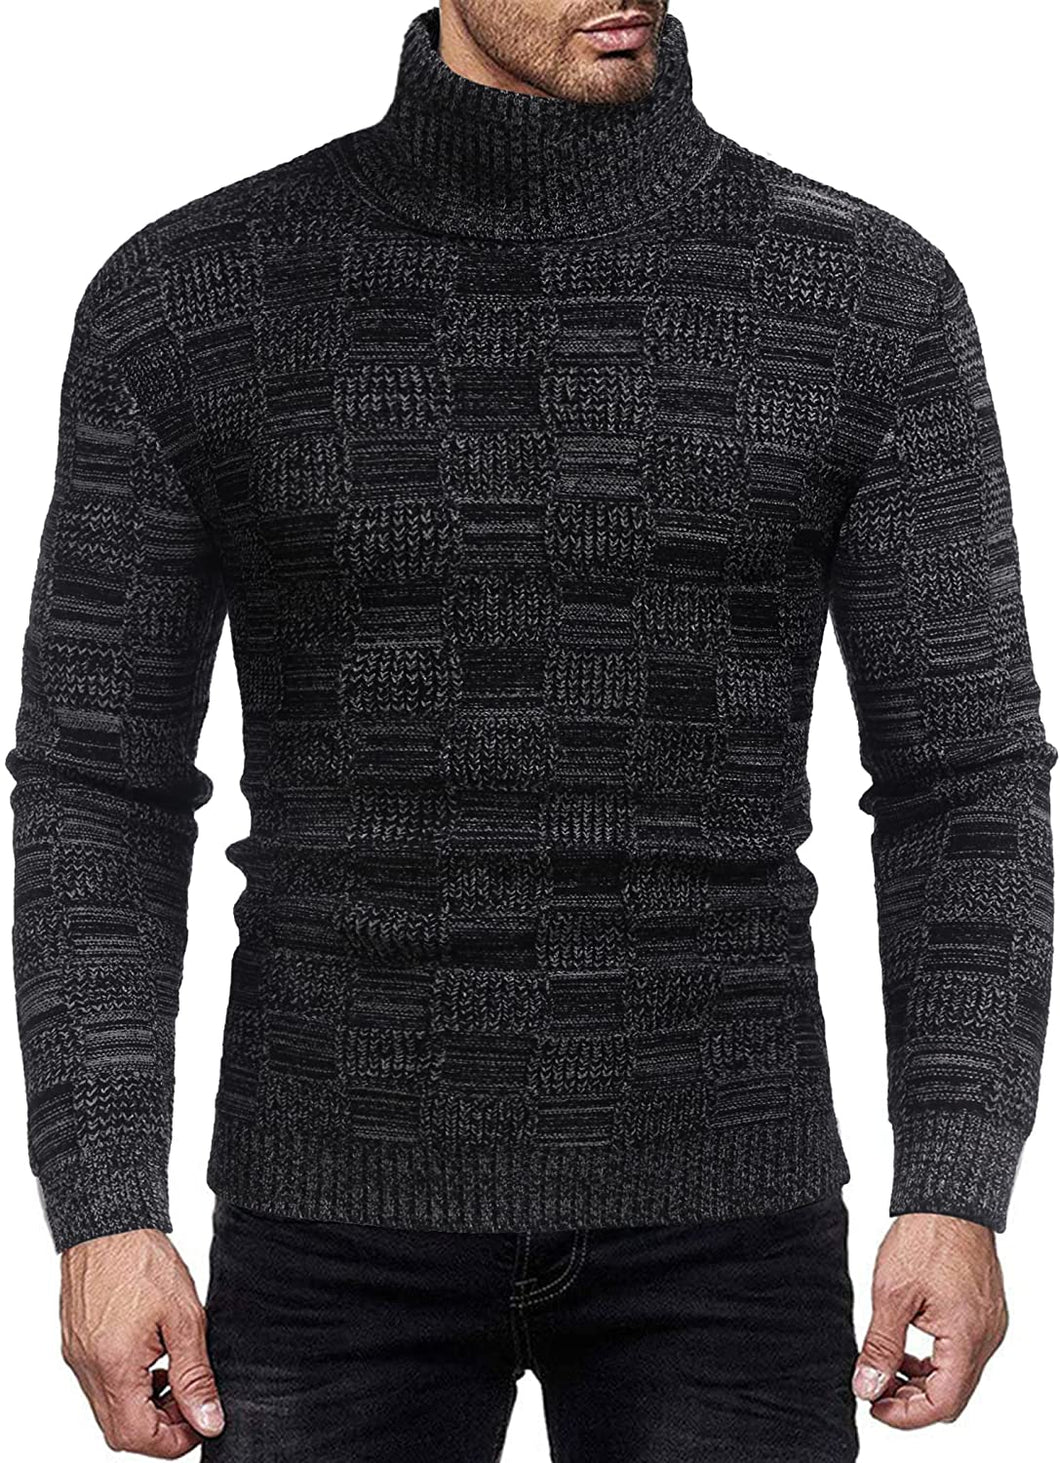 Thermal Ribbed Black Pullover Turtleneck Knitted Sweater